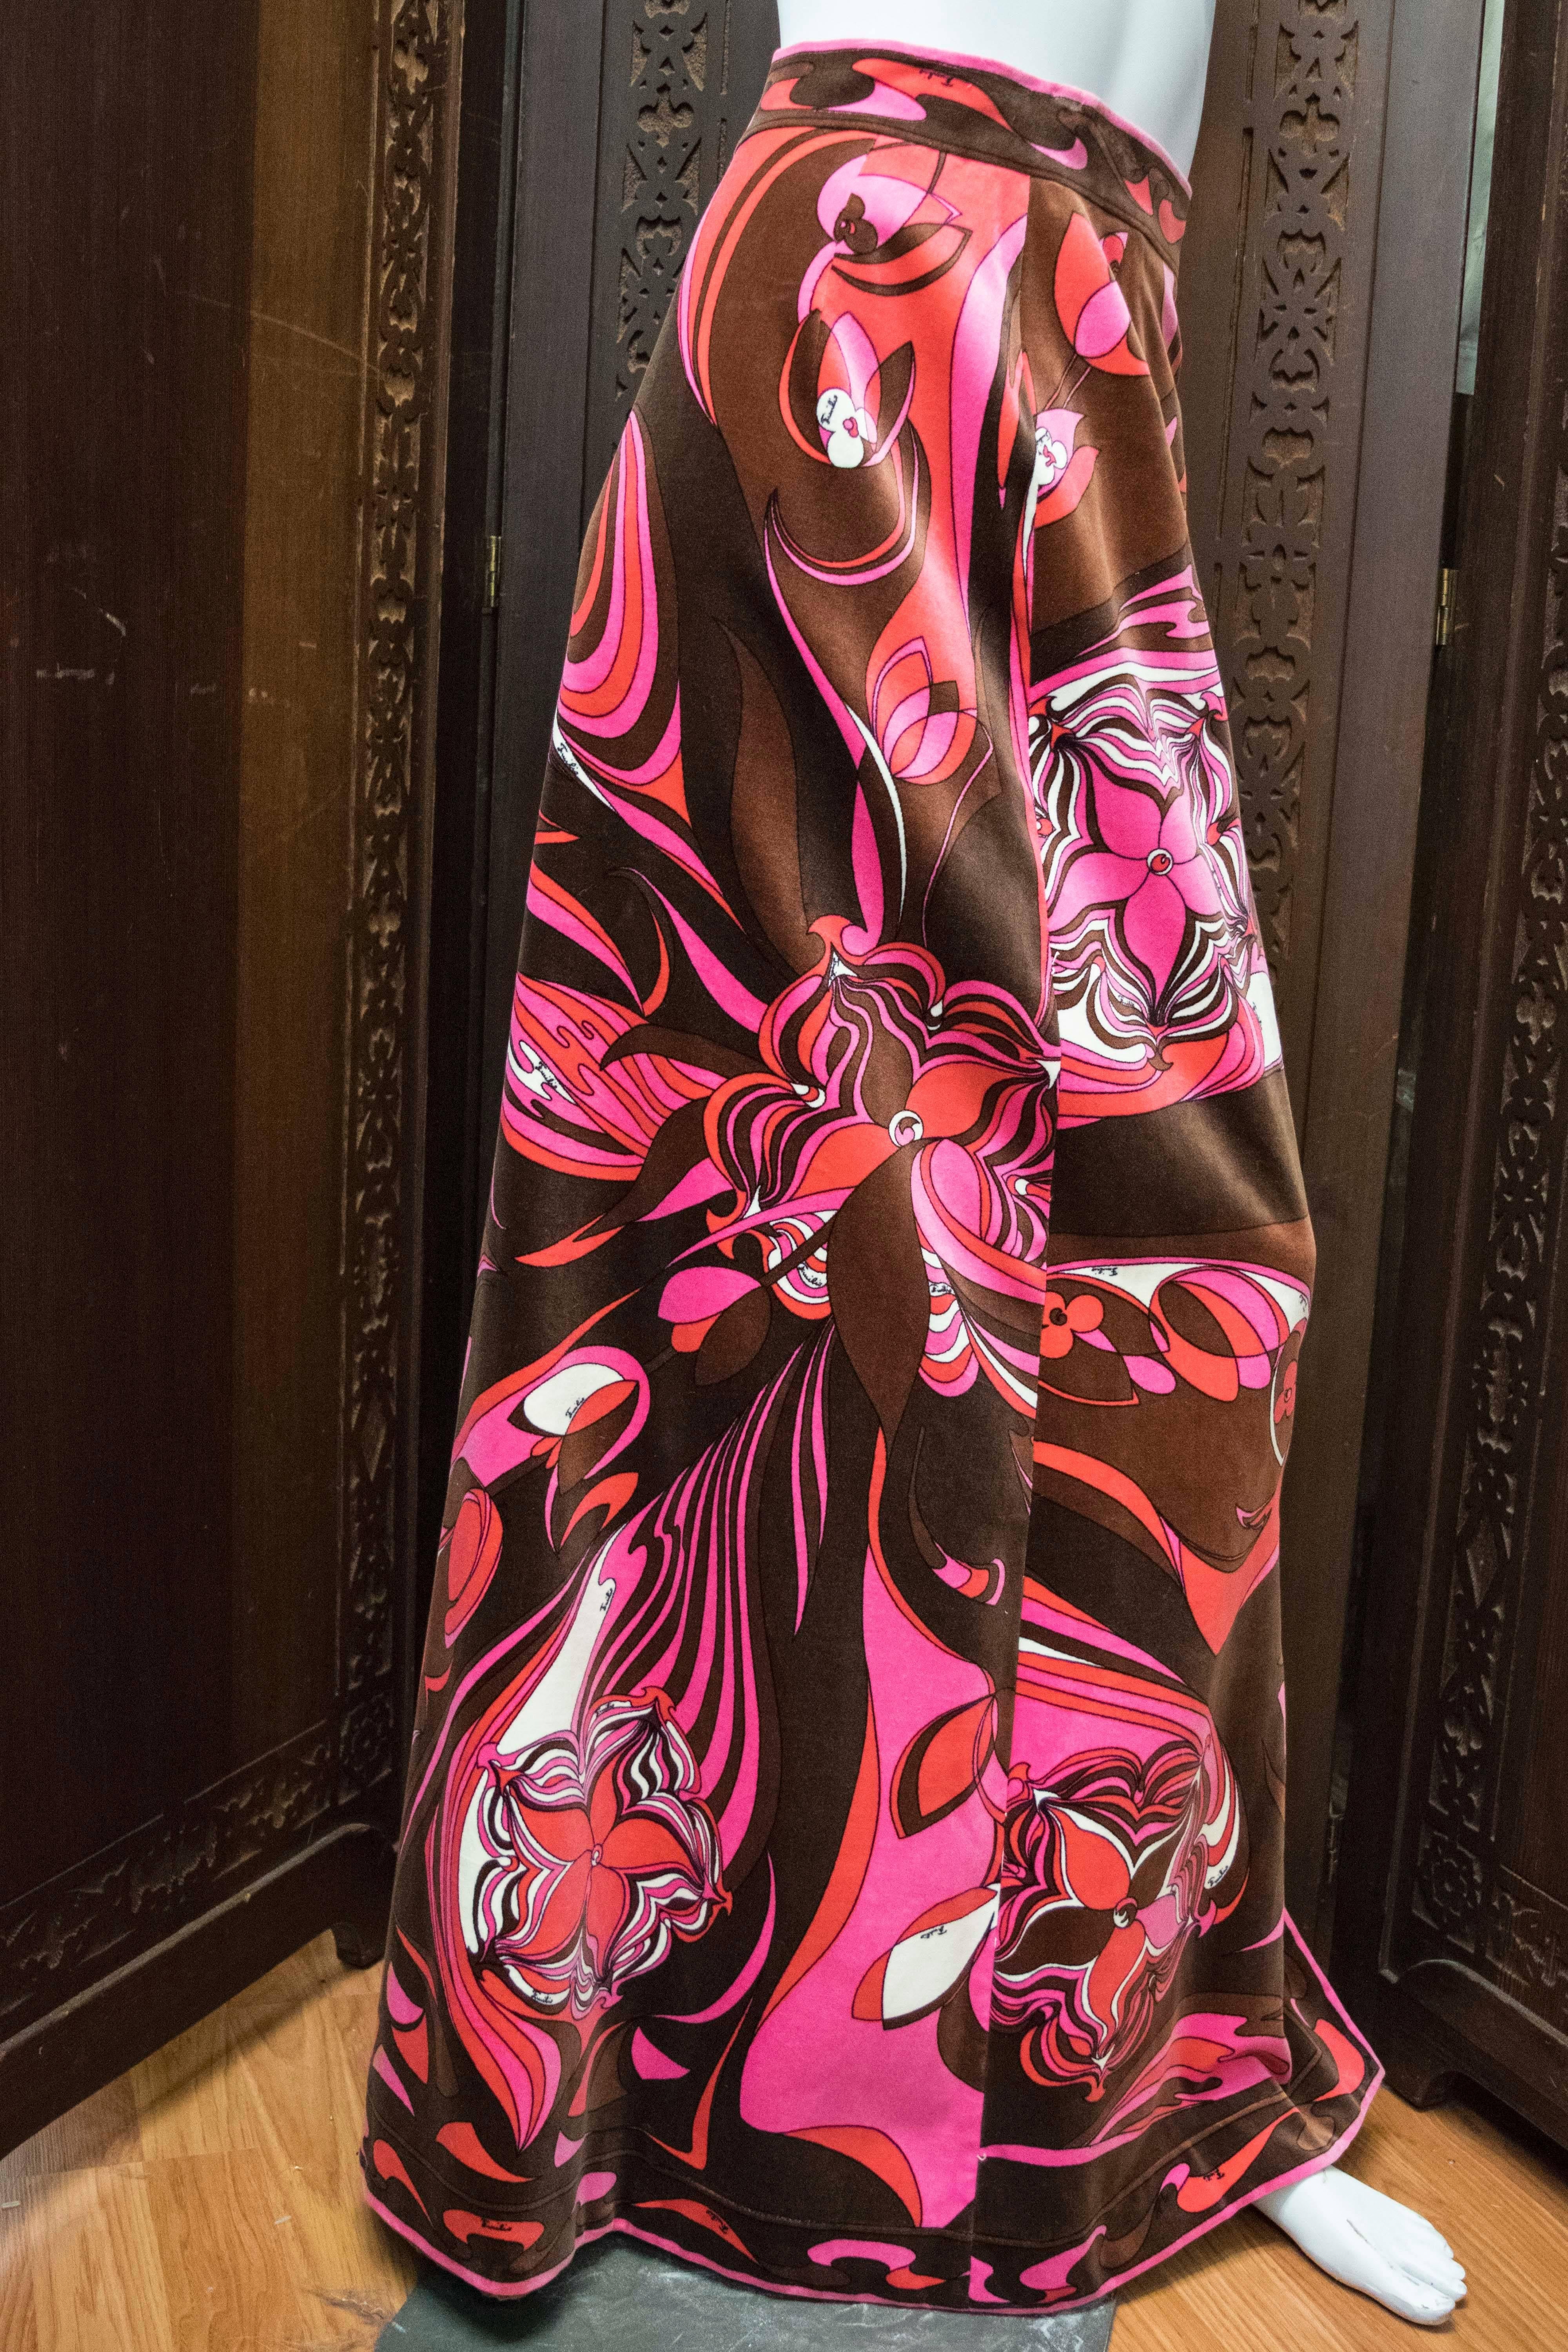 A-line flared velvet maxi skirt by Emilio Pucci. The kaliadscopic graphic print has panels of vibrantly colored florals in pinks, browns and burgundy. Side zip entry. Originally retailed by Saks Fifth Ave.